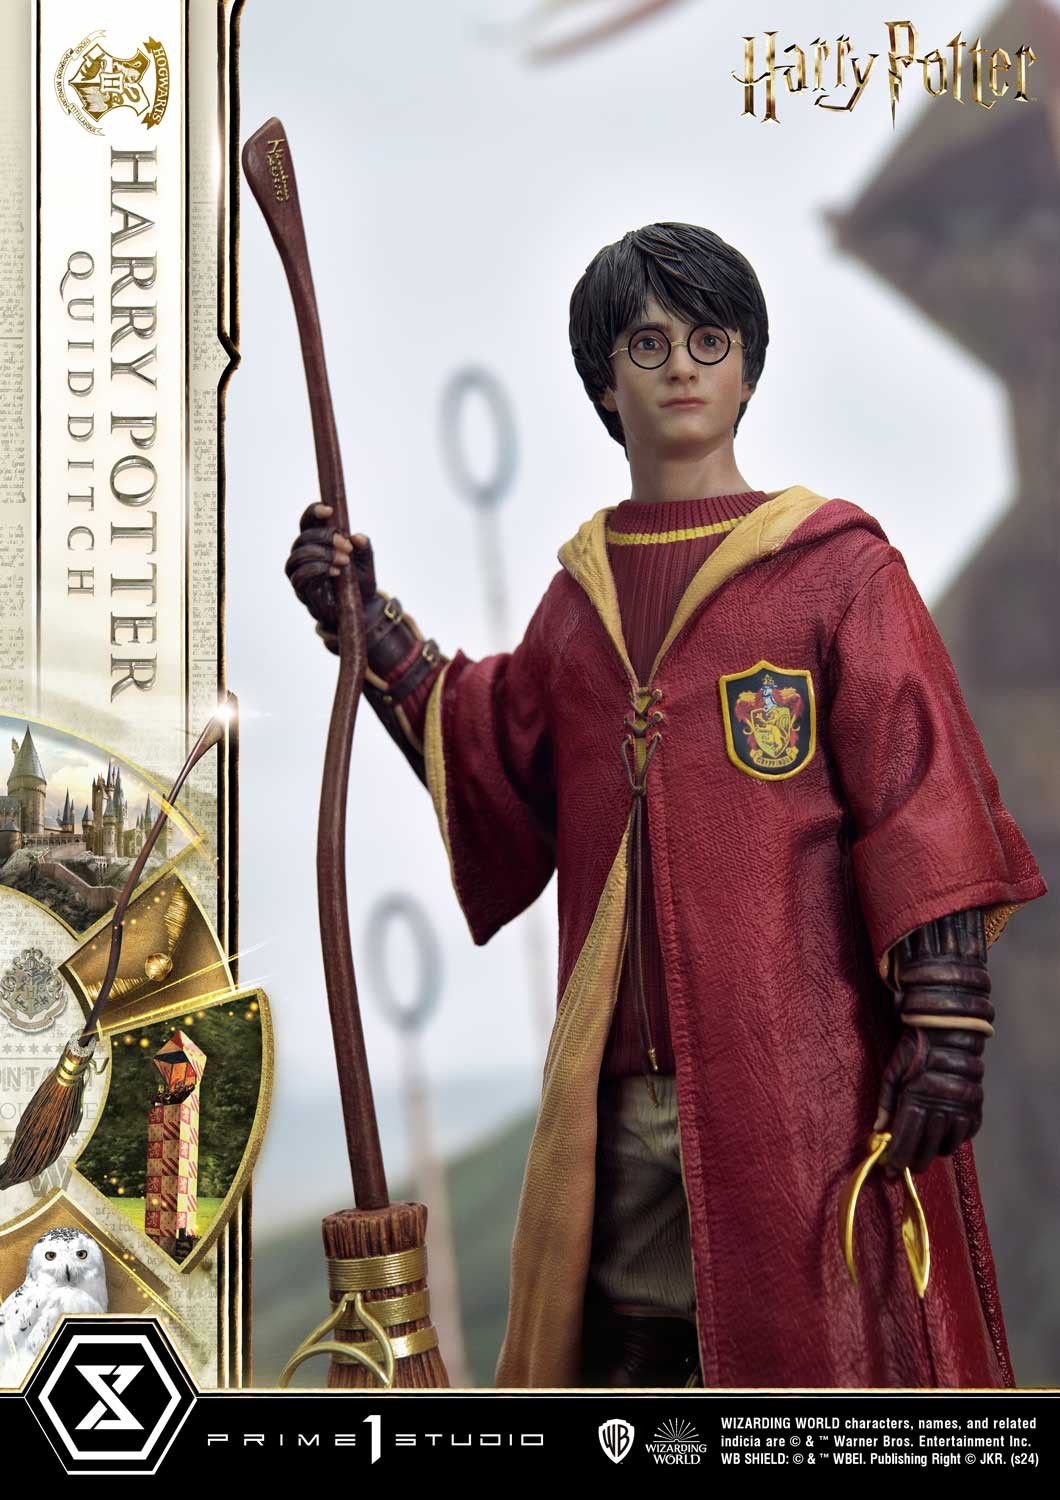 Harry Potter (Quidditch Edition) (Prototype Shown) View 22